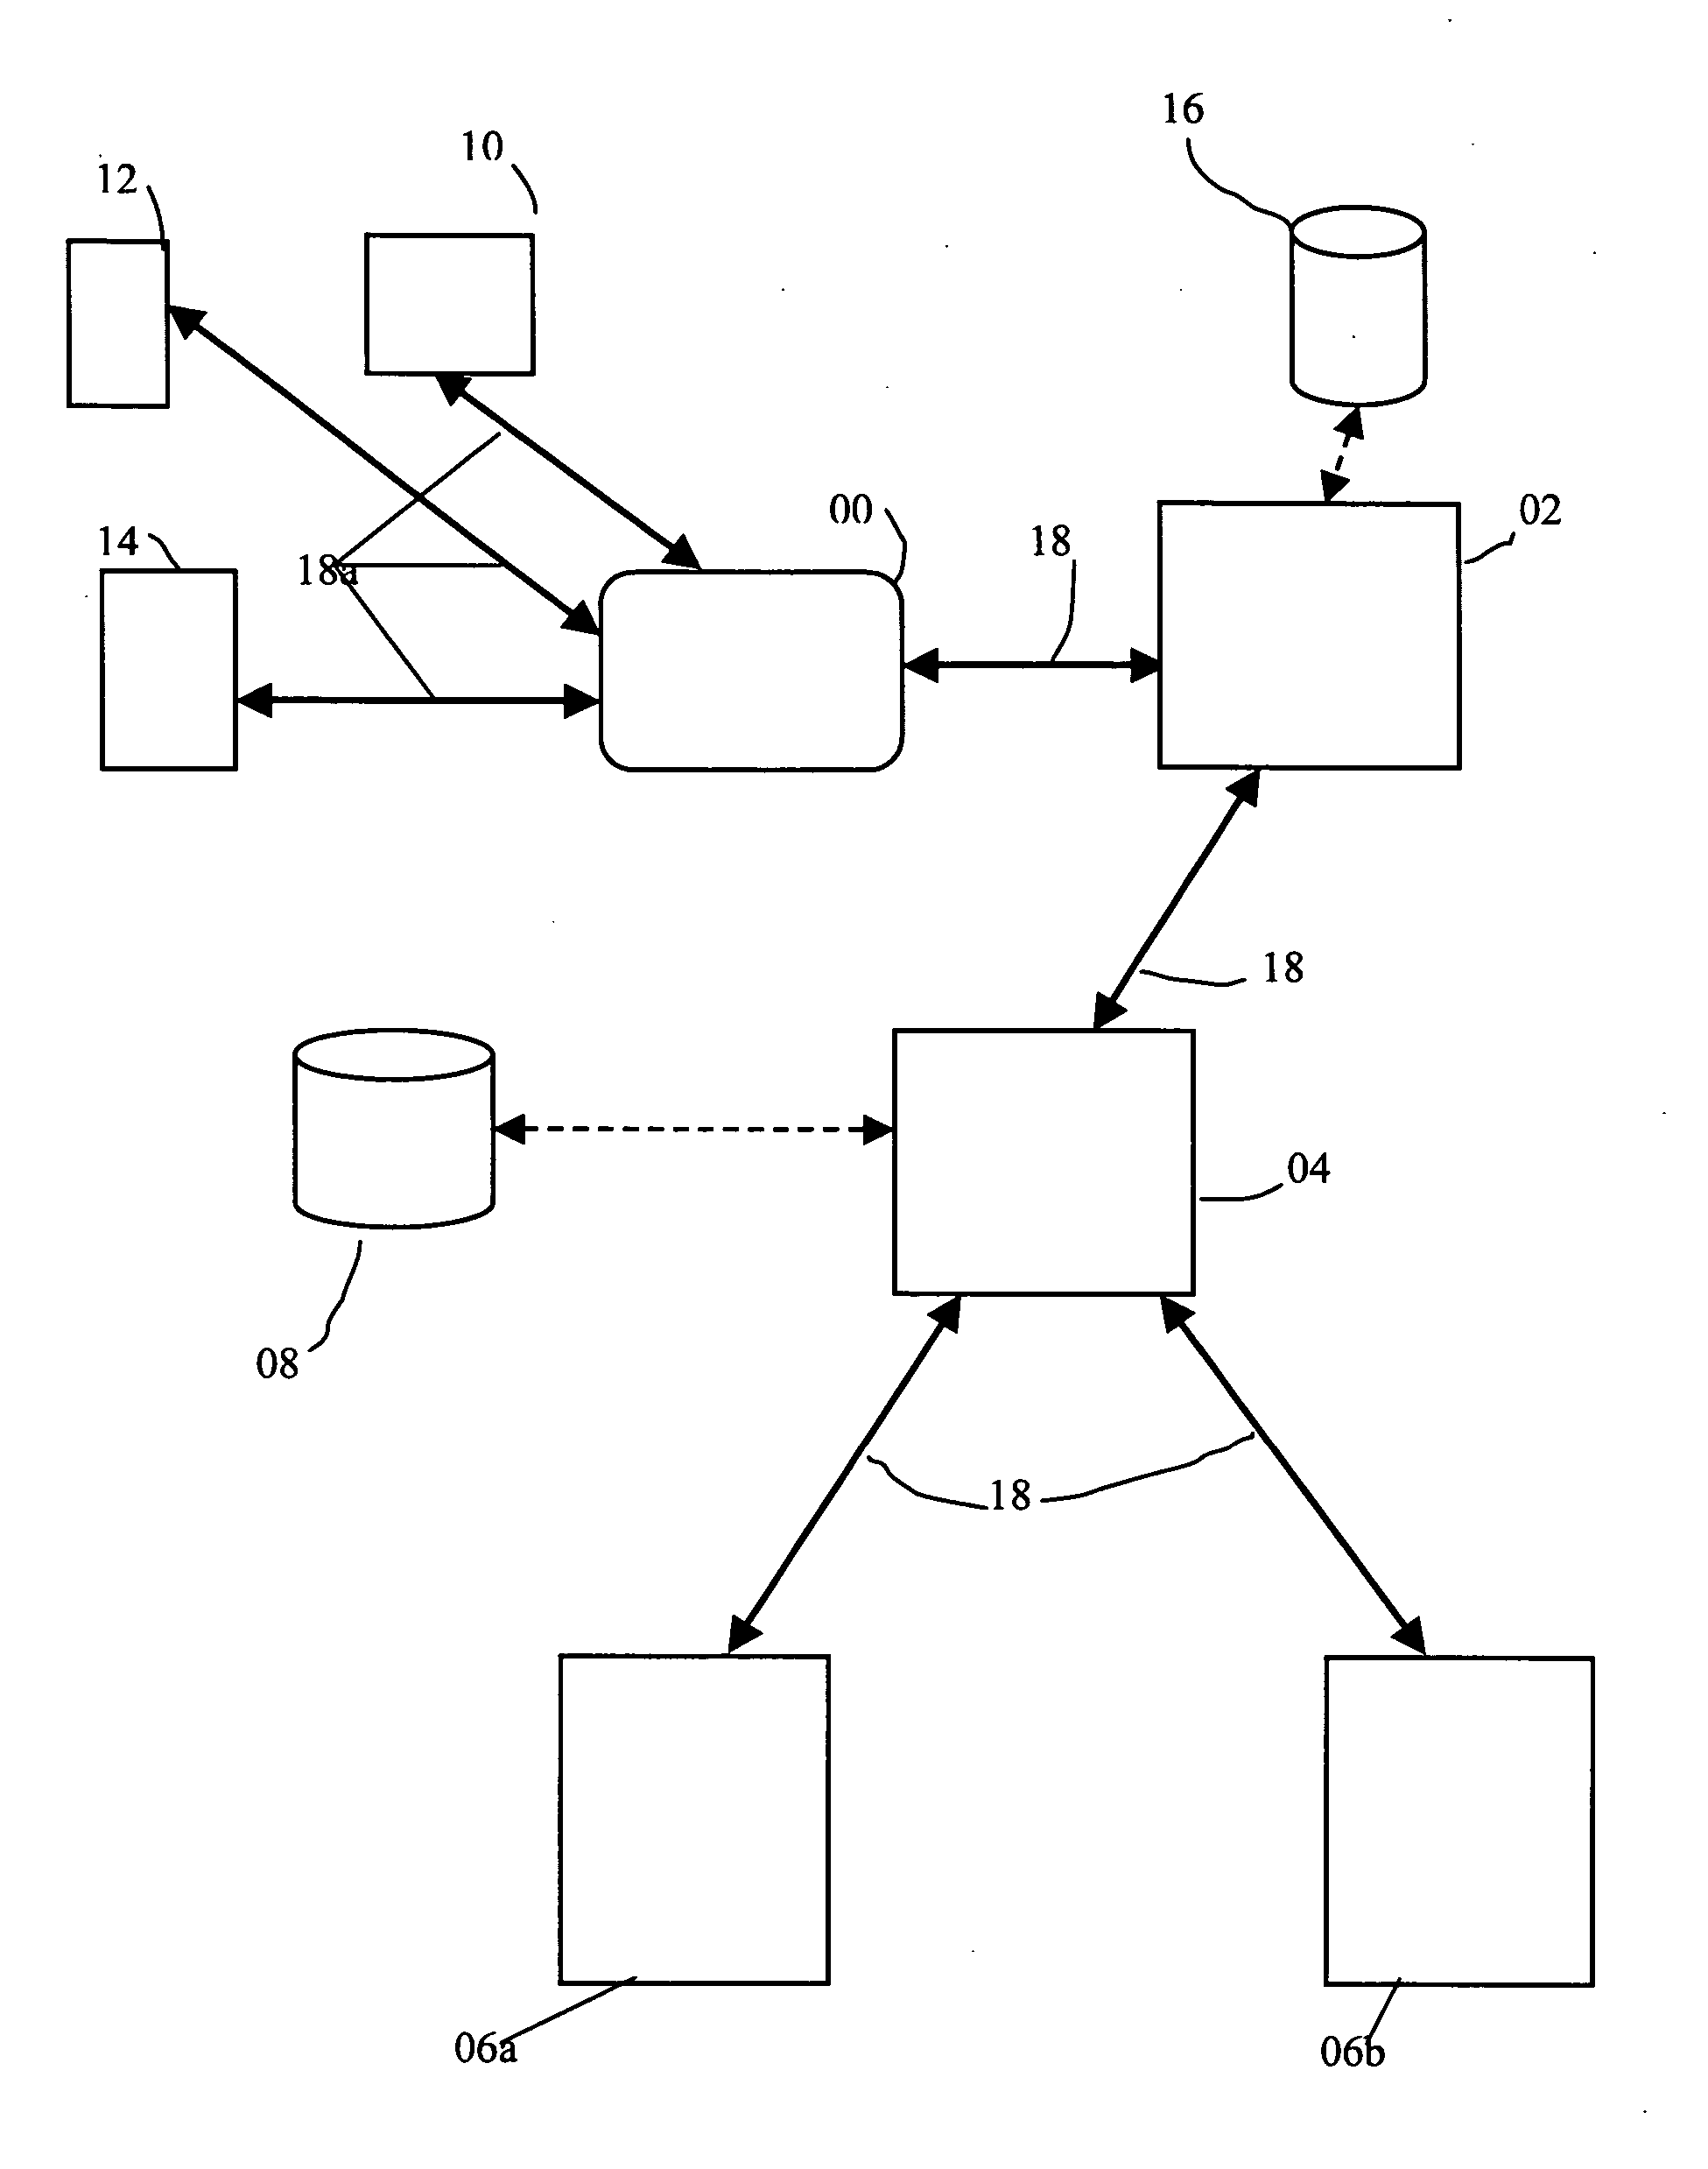 System and method for searching for patterns of semiconductor wafer features in semiconductor wafer data